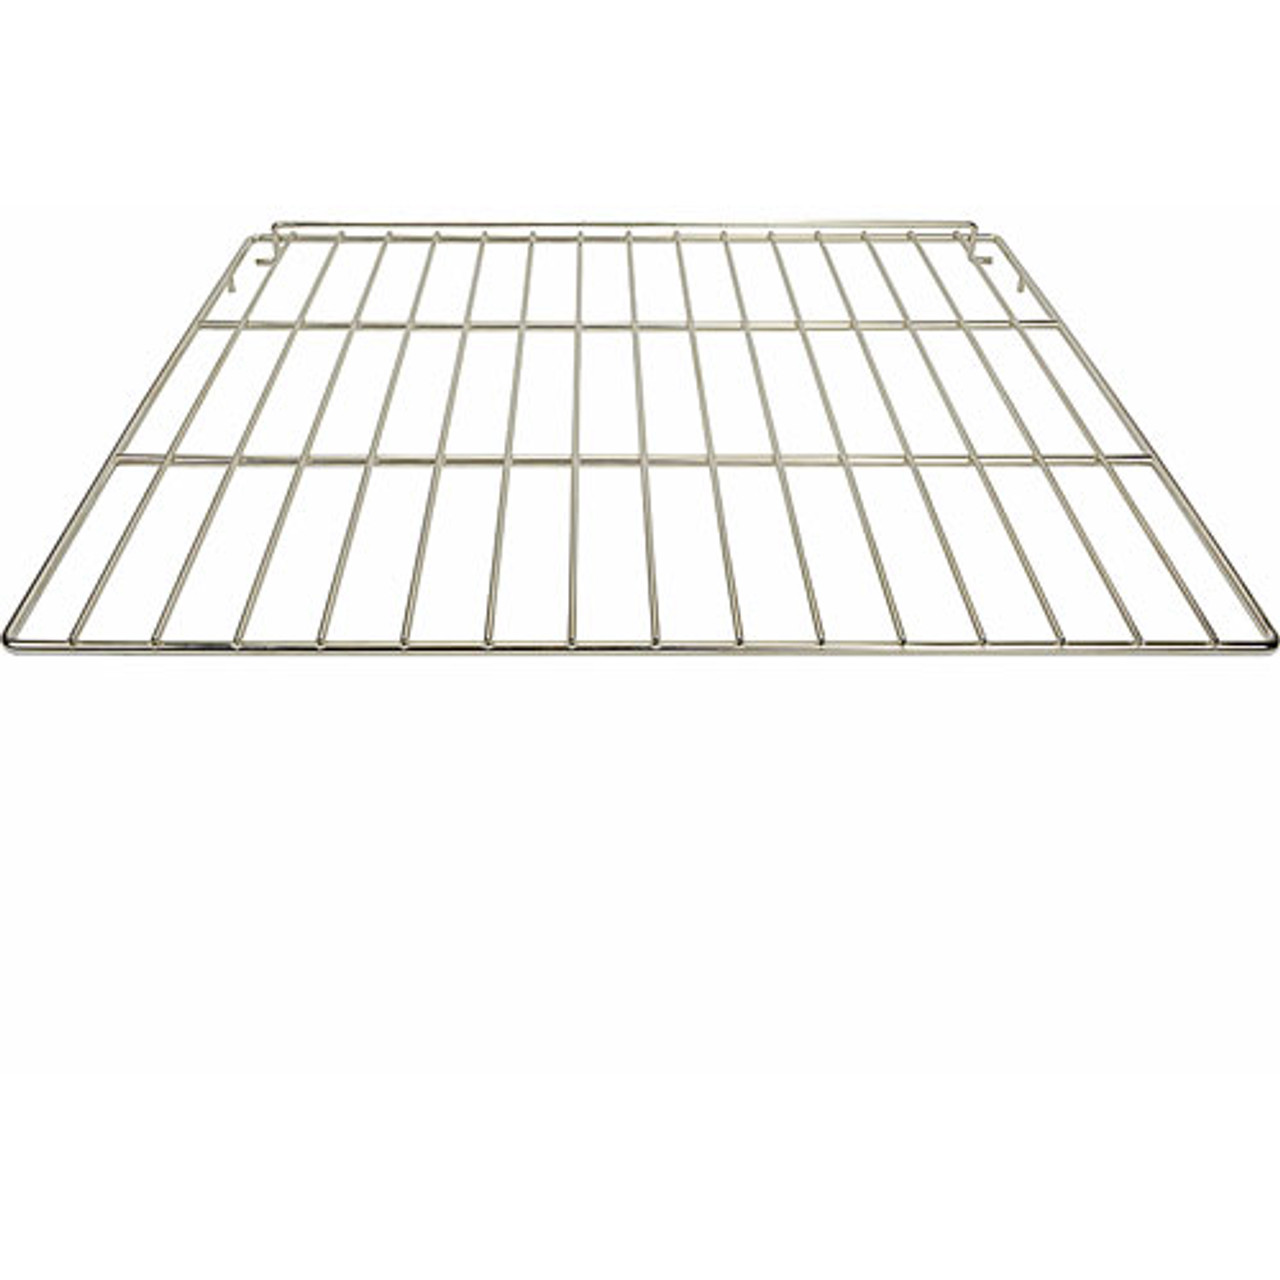 Garland GL1607000 - Oven Rack-Mco/Mco Gs